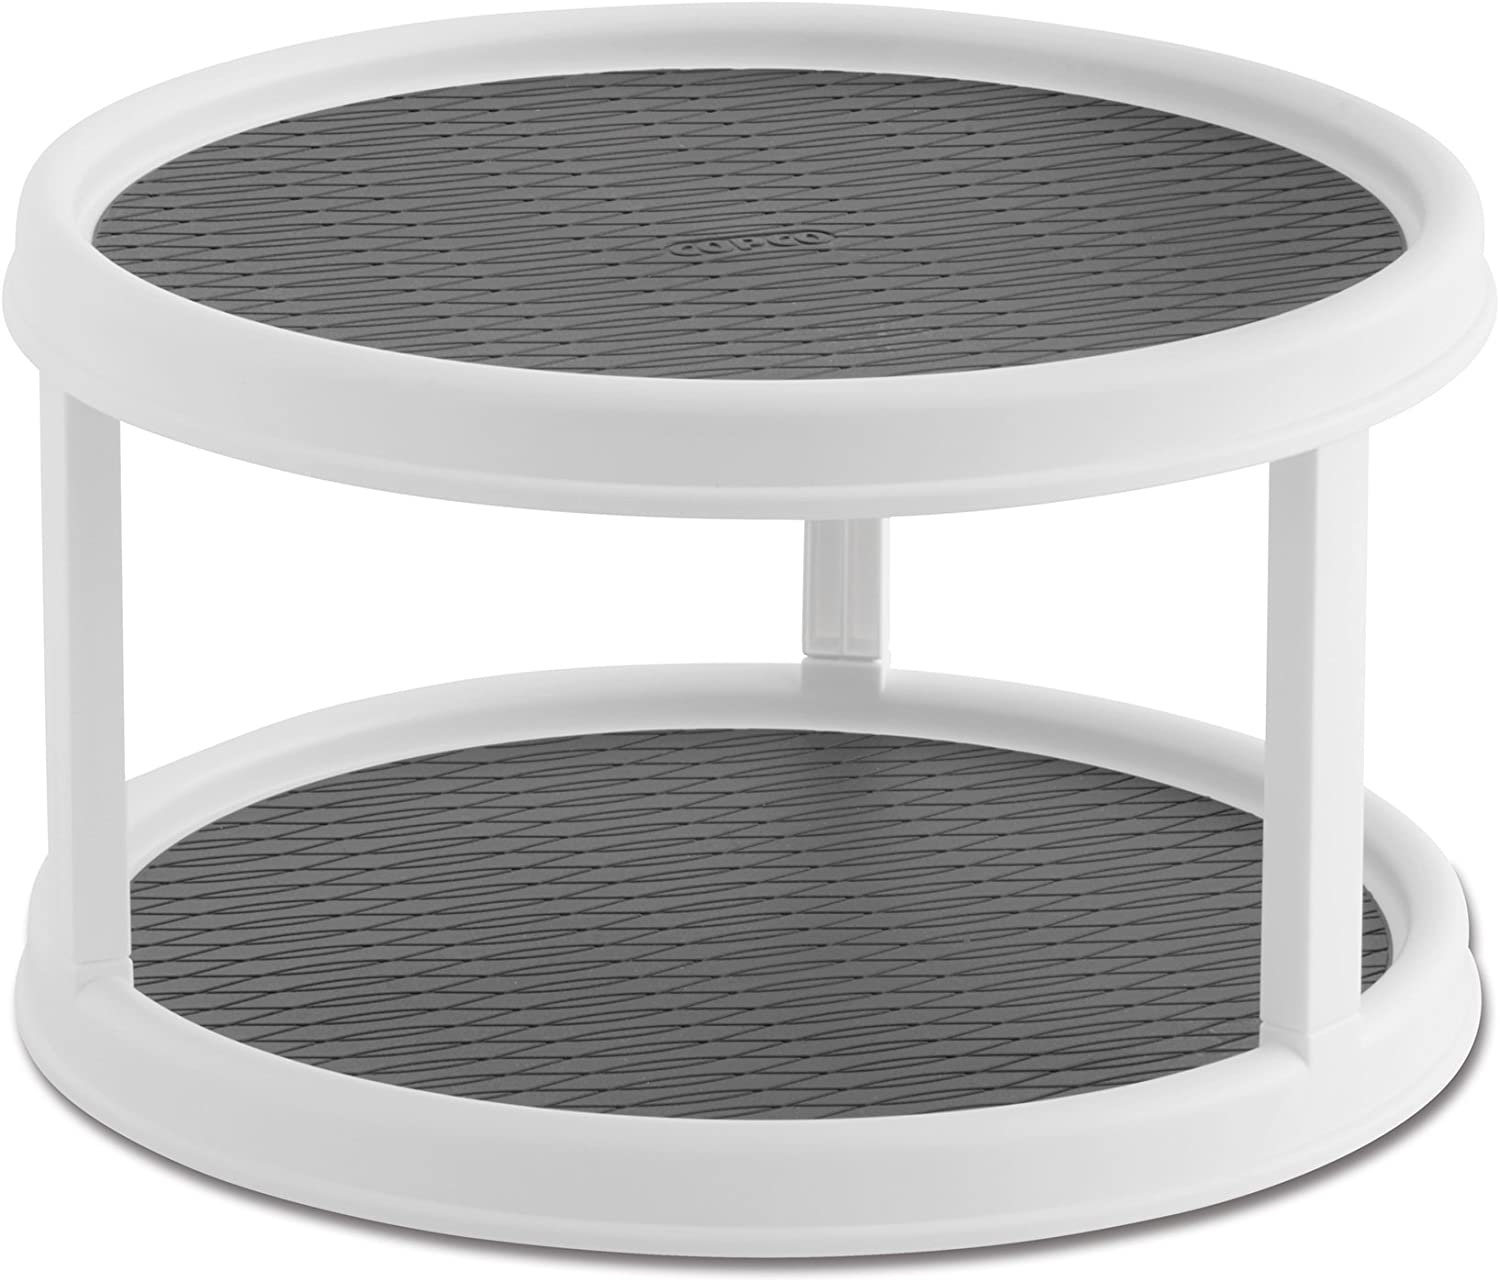 Prime Members: 12" Copco Basics Non-Skid Pantry Cabinet Lazy Susan Turntable (White/Gray) $7.30 and More + Free Shipping w/ Prime or on $25+